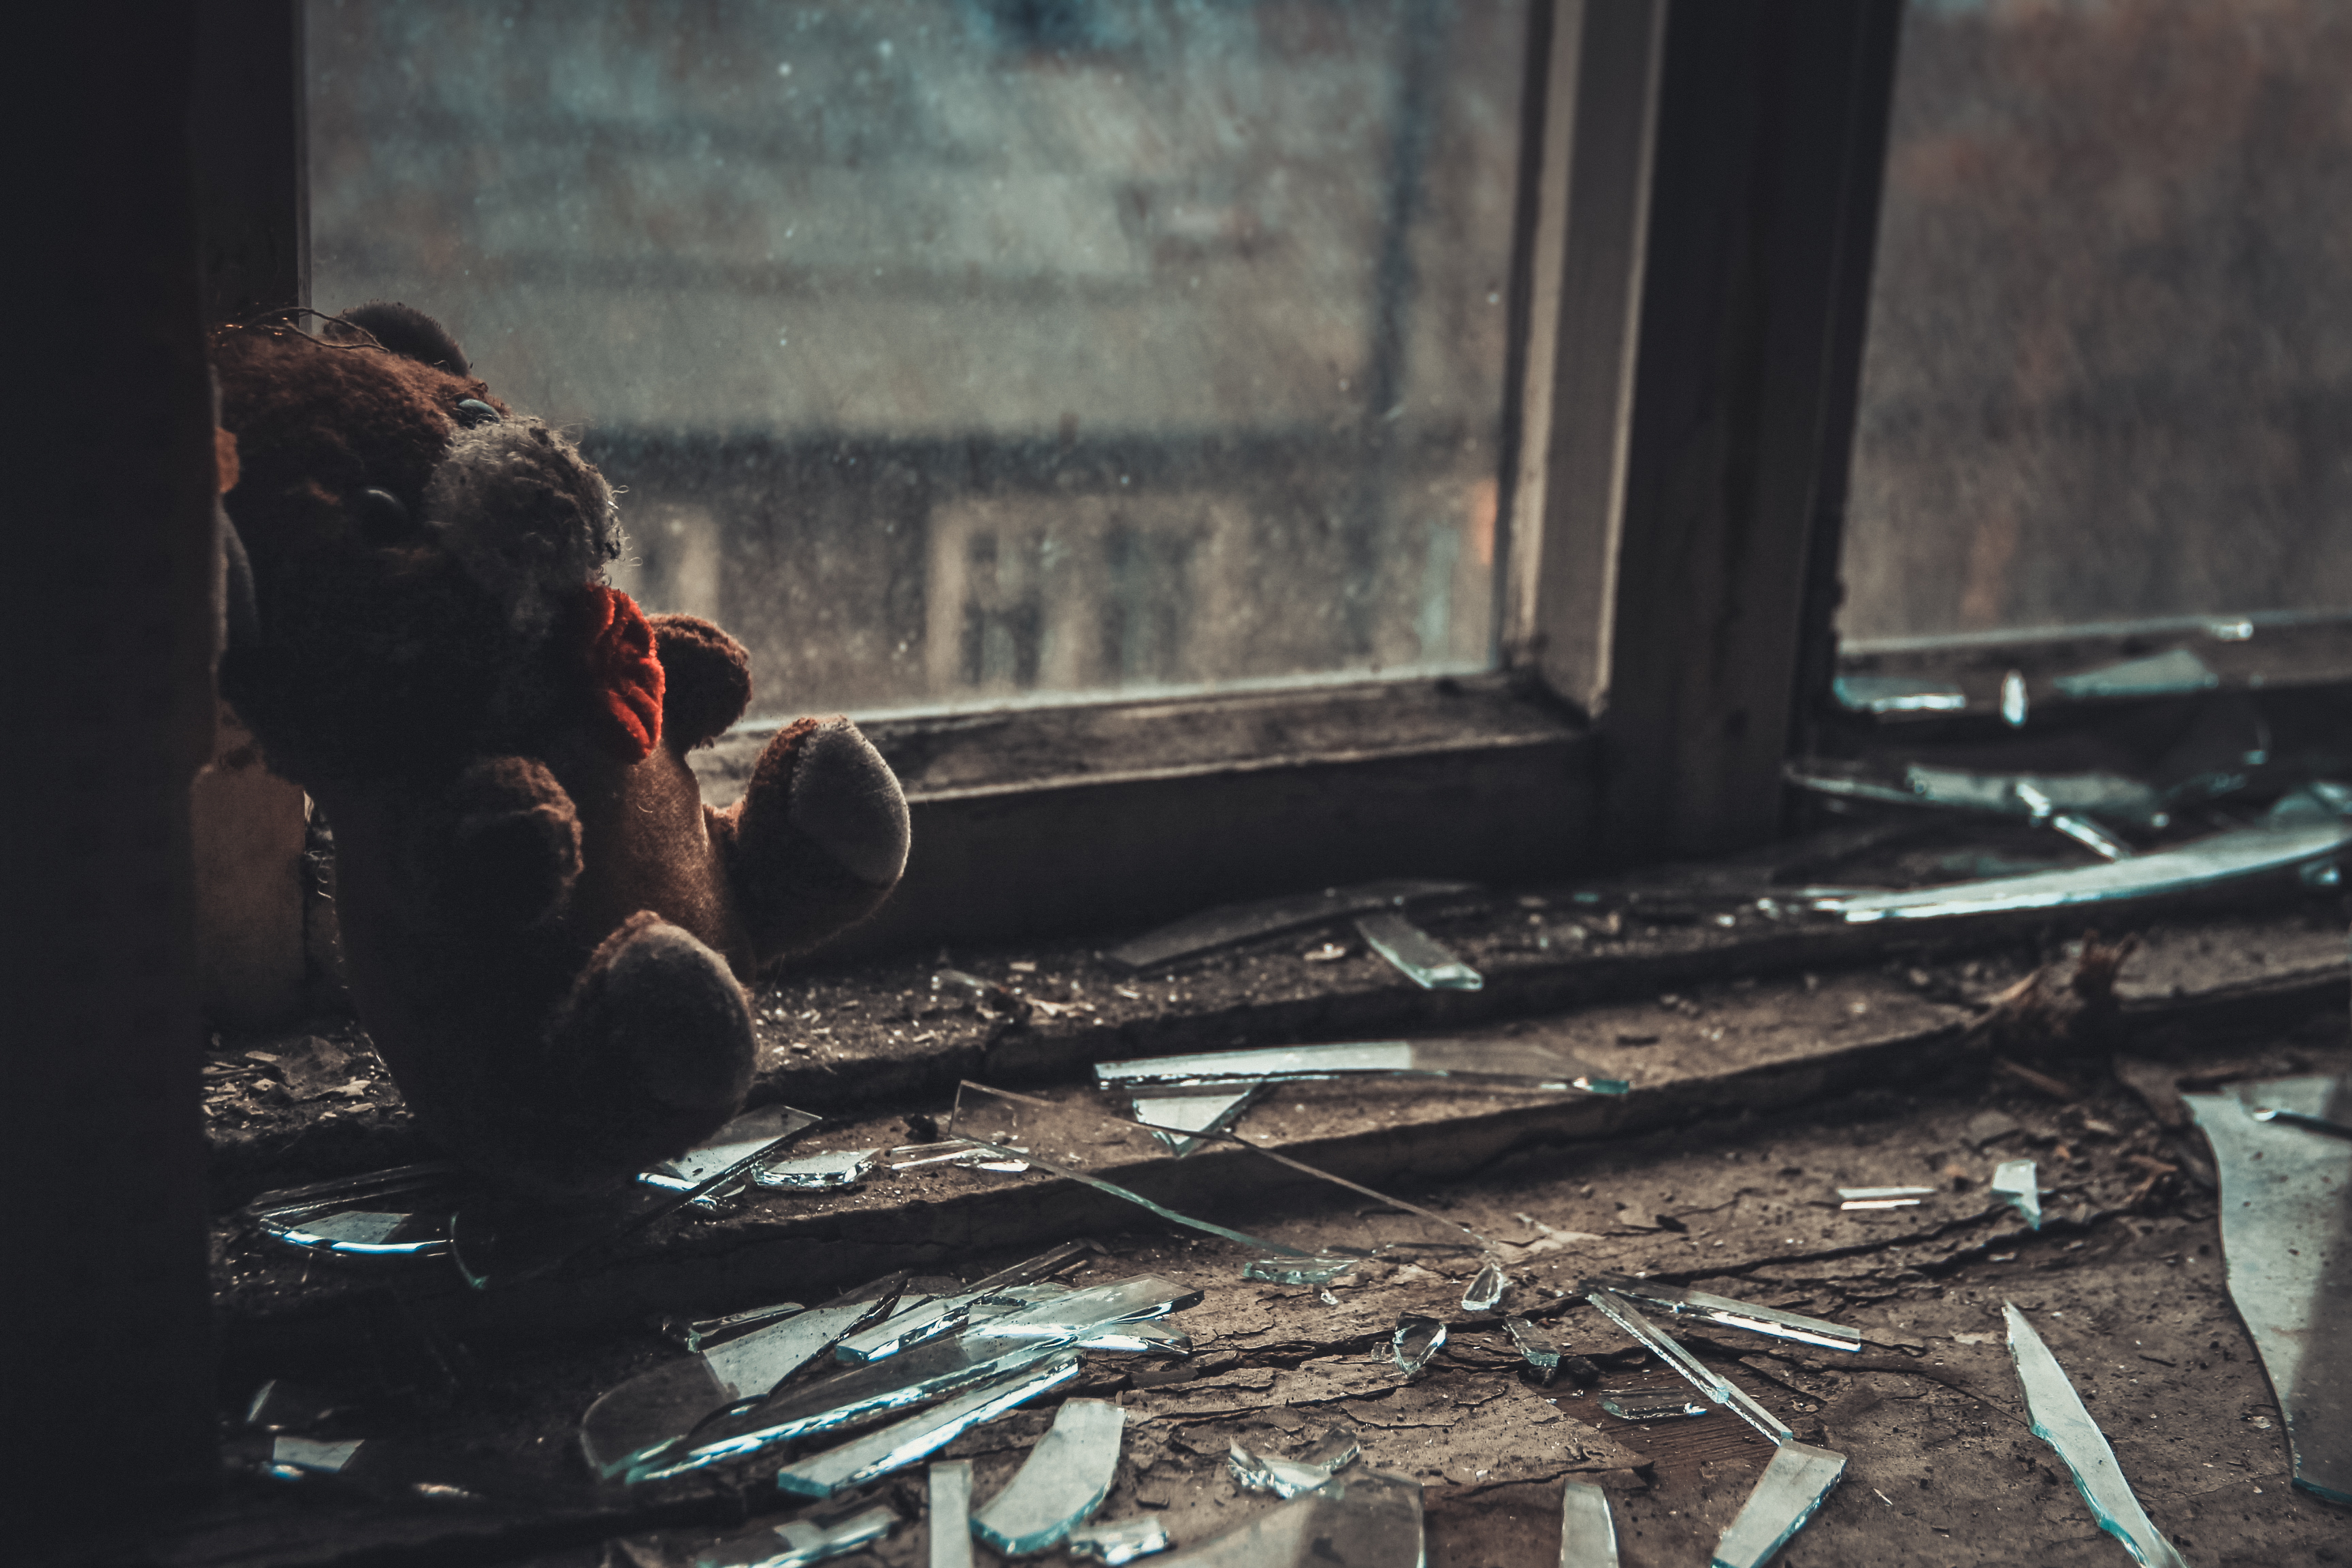 Soft toy on the windowsill in the empty abandoned apartment. | Source: Shutterstock